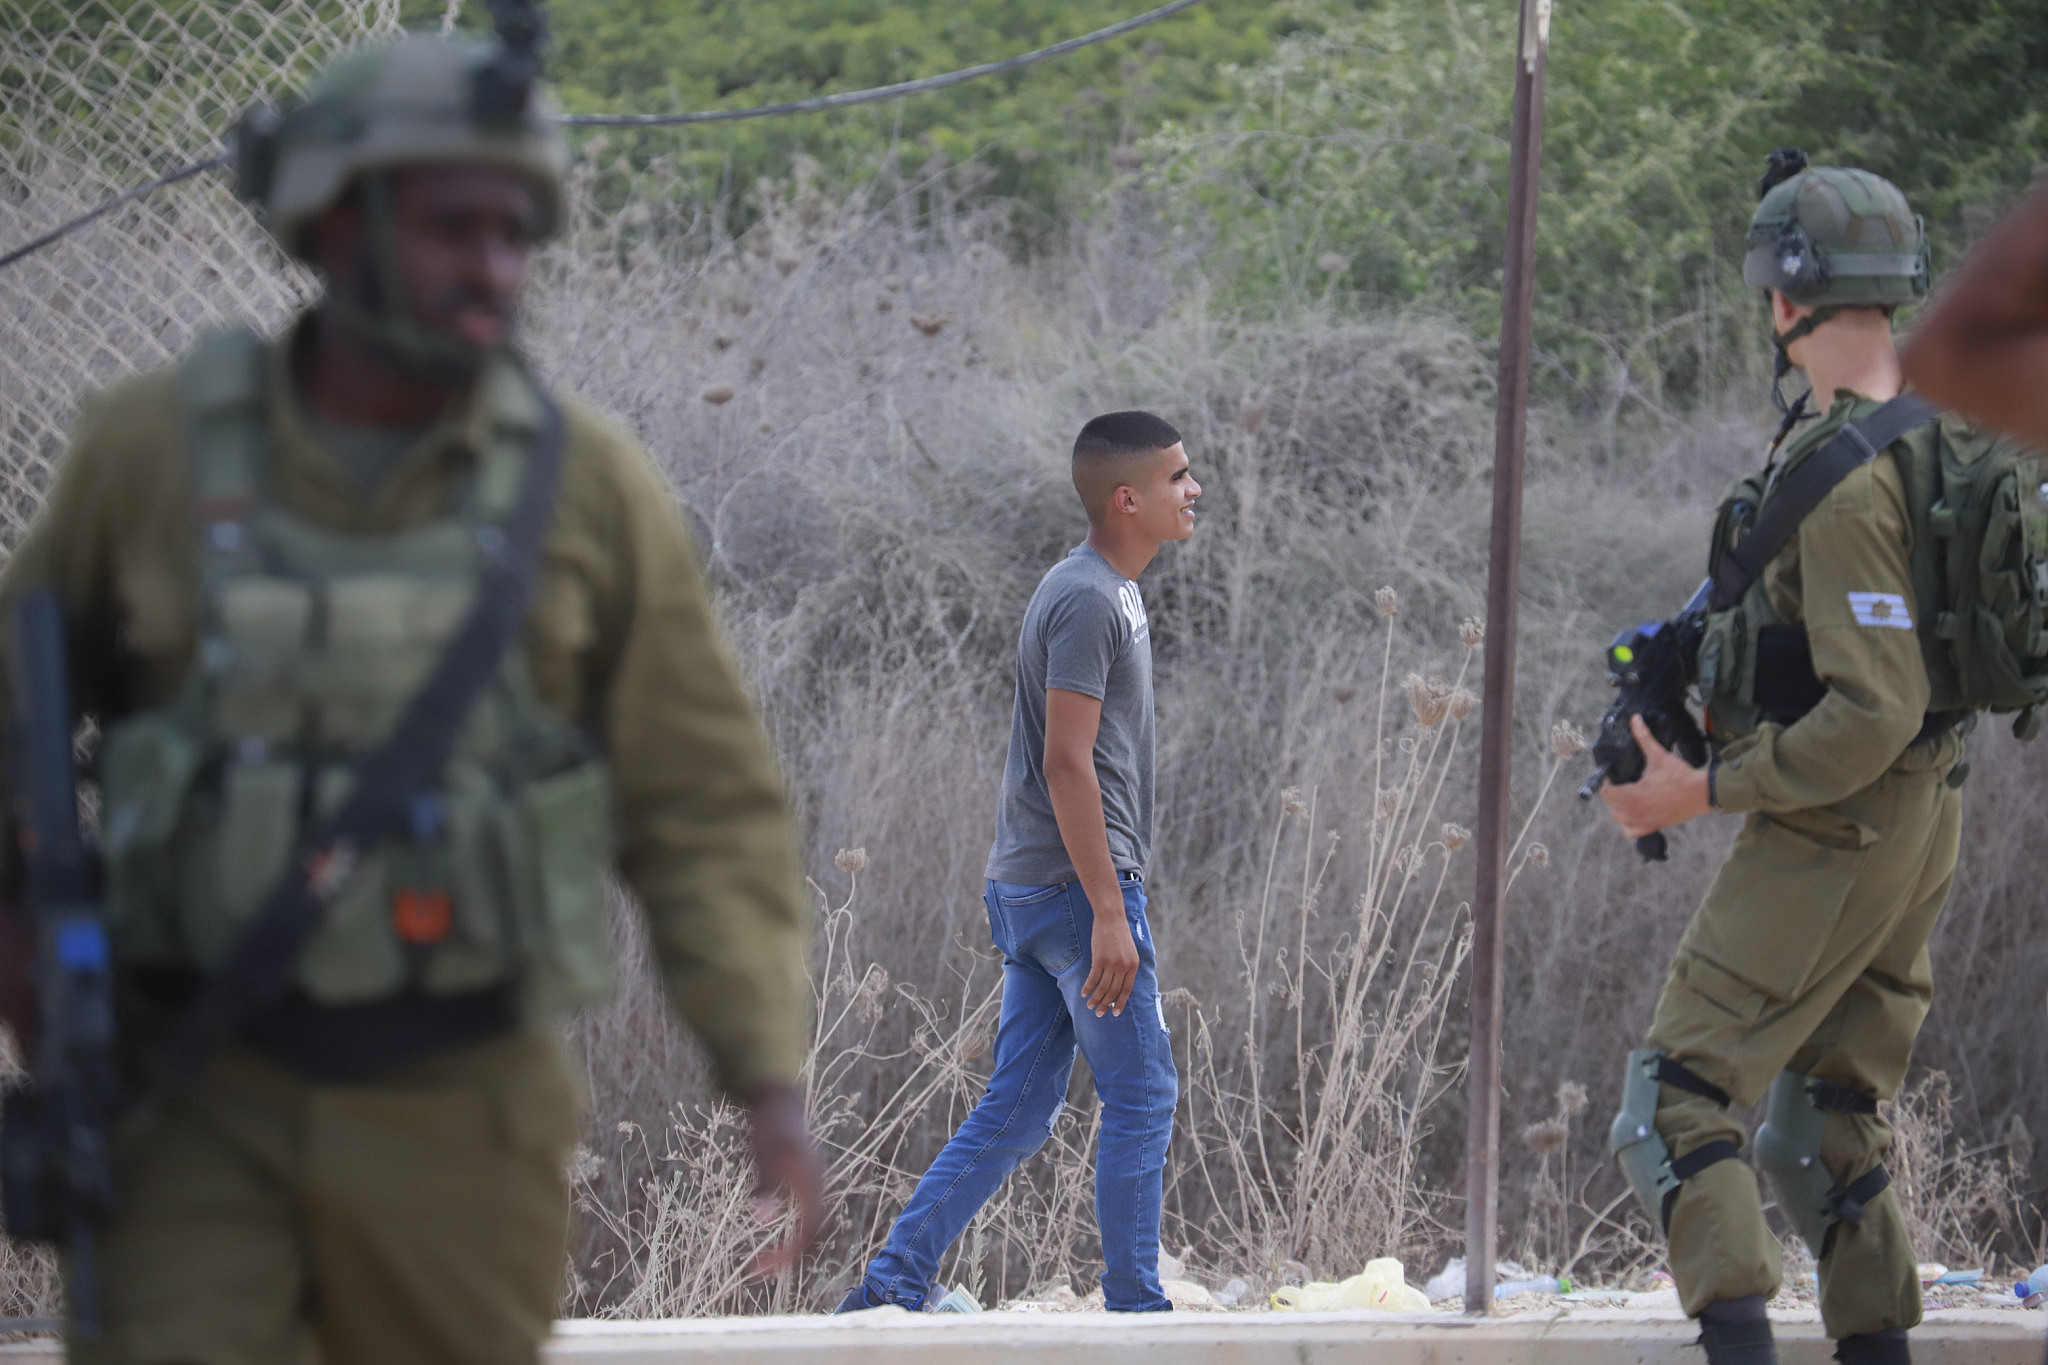 A Palestinian walks by Israeli soldiers close to a hole in the Israeli separation barrier next to the West Bank village of Far’oun near Tulkarem. (Activestills)